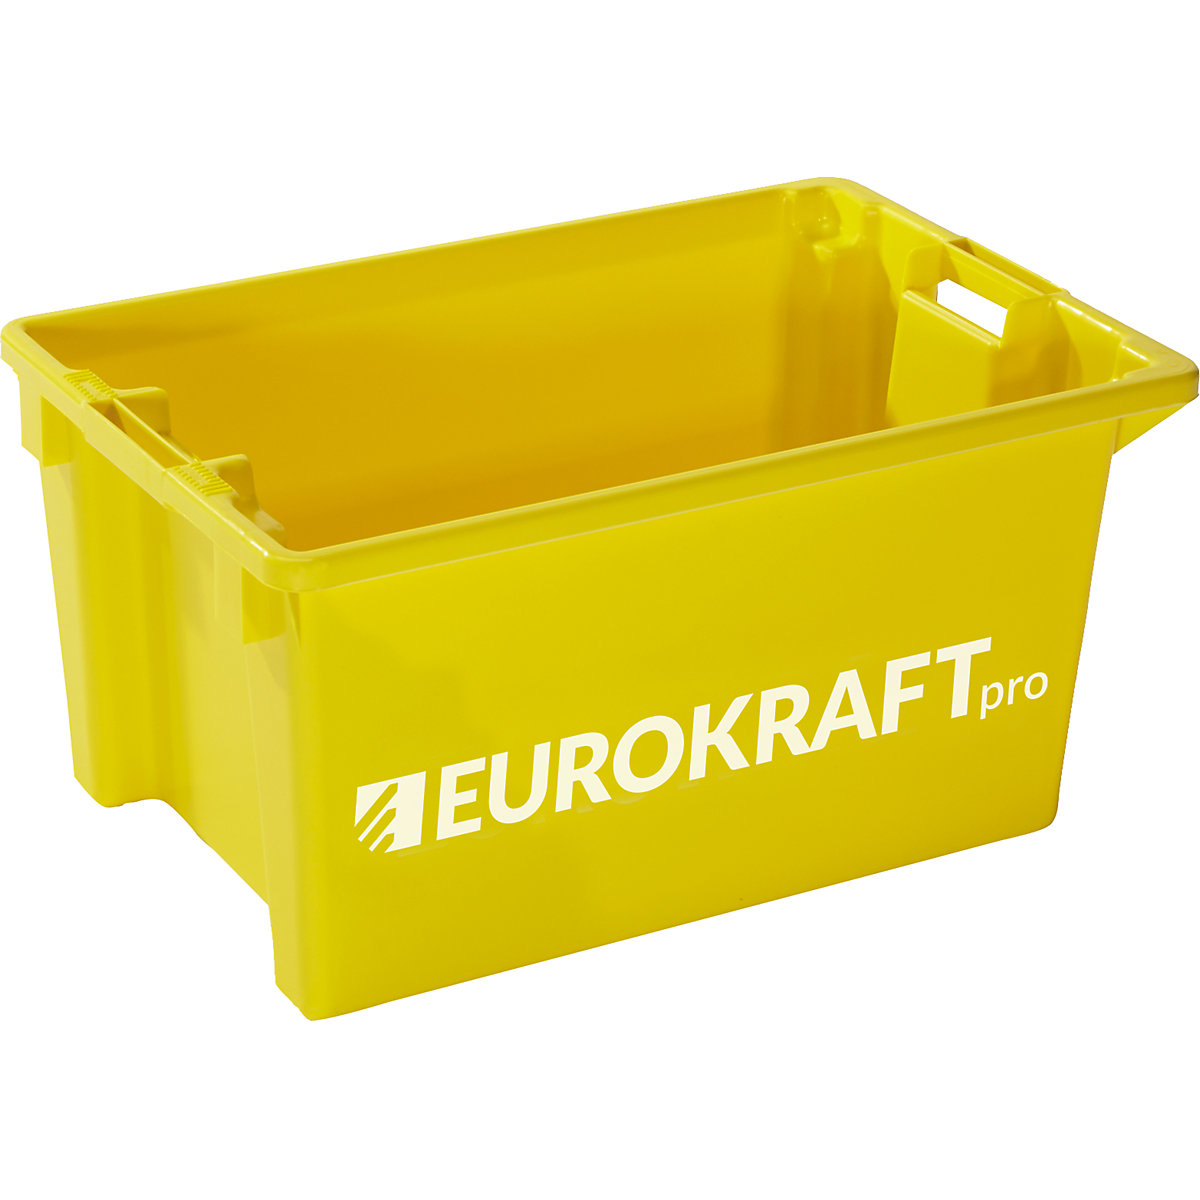 Stack/nest container – eurokraft pro